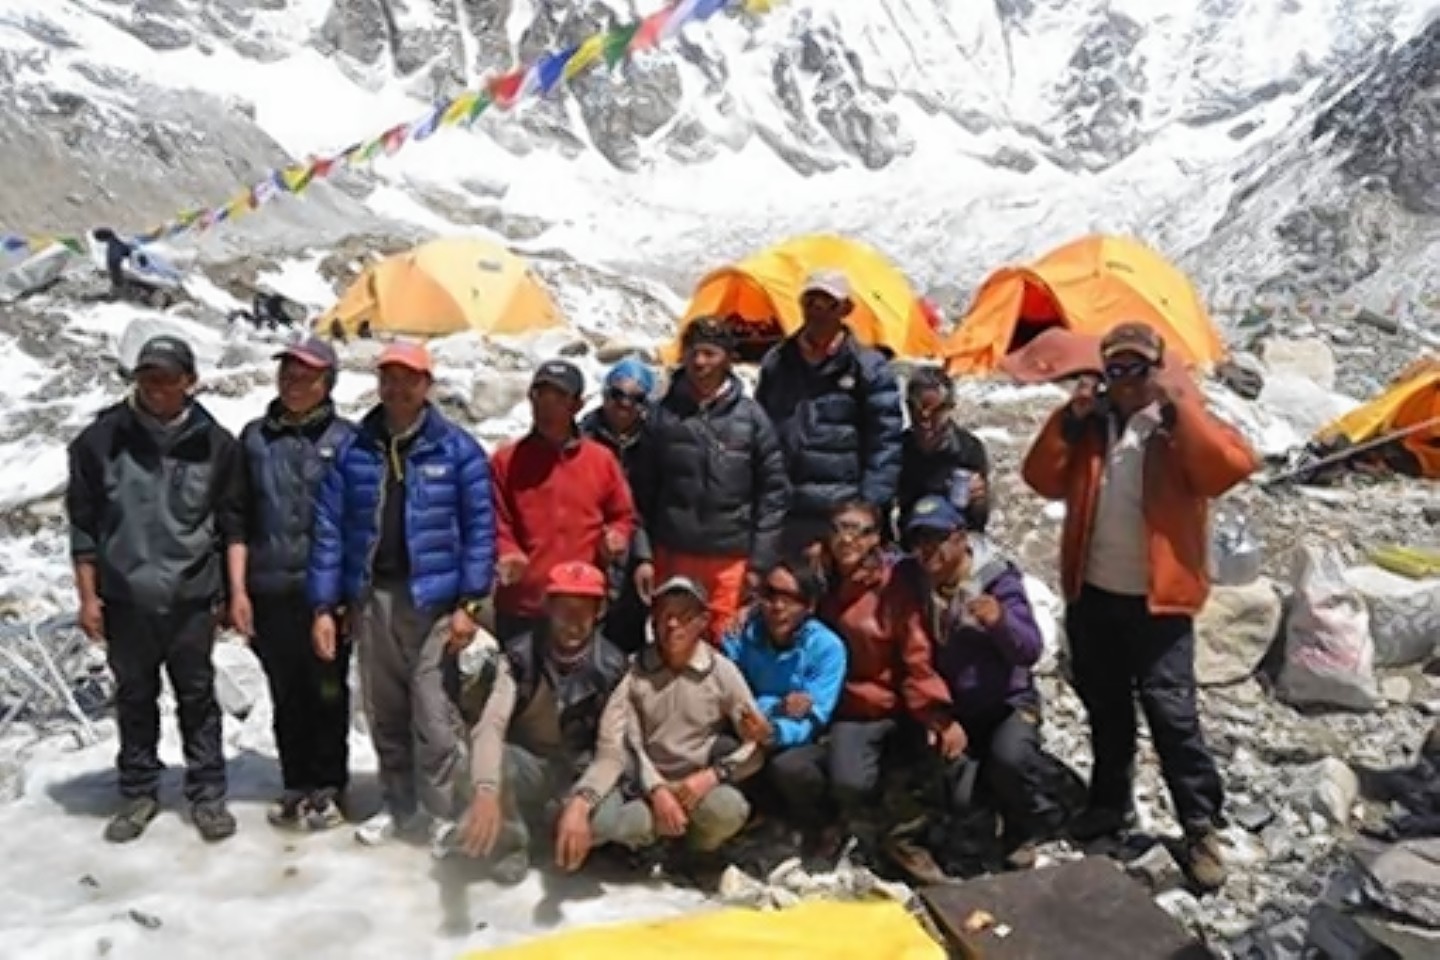 The sherpa group at Everest base camp a few days before the devastating avalanche which killed three of the group